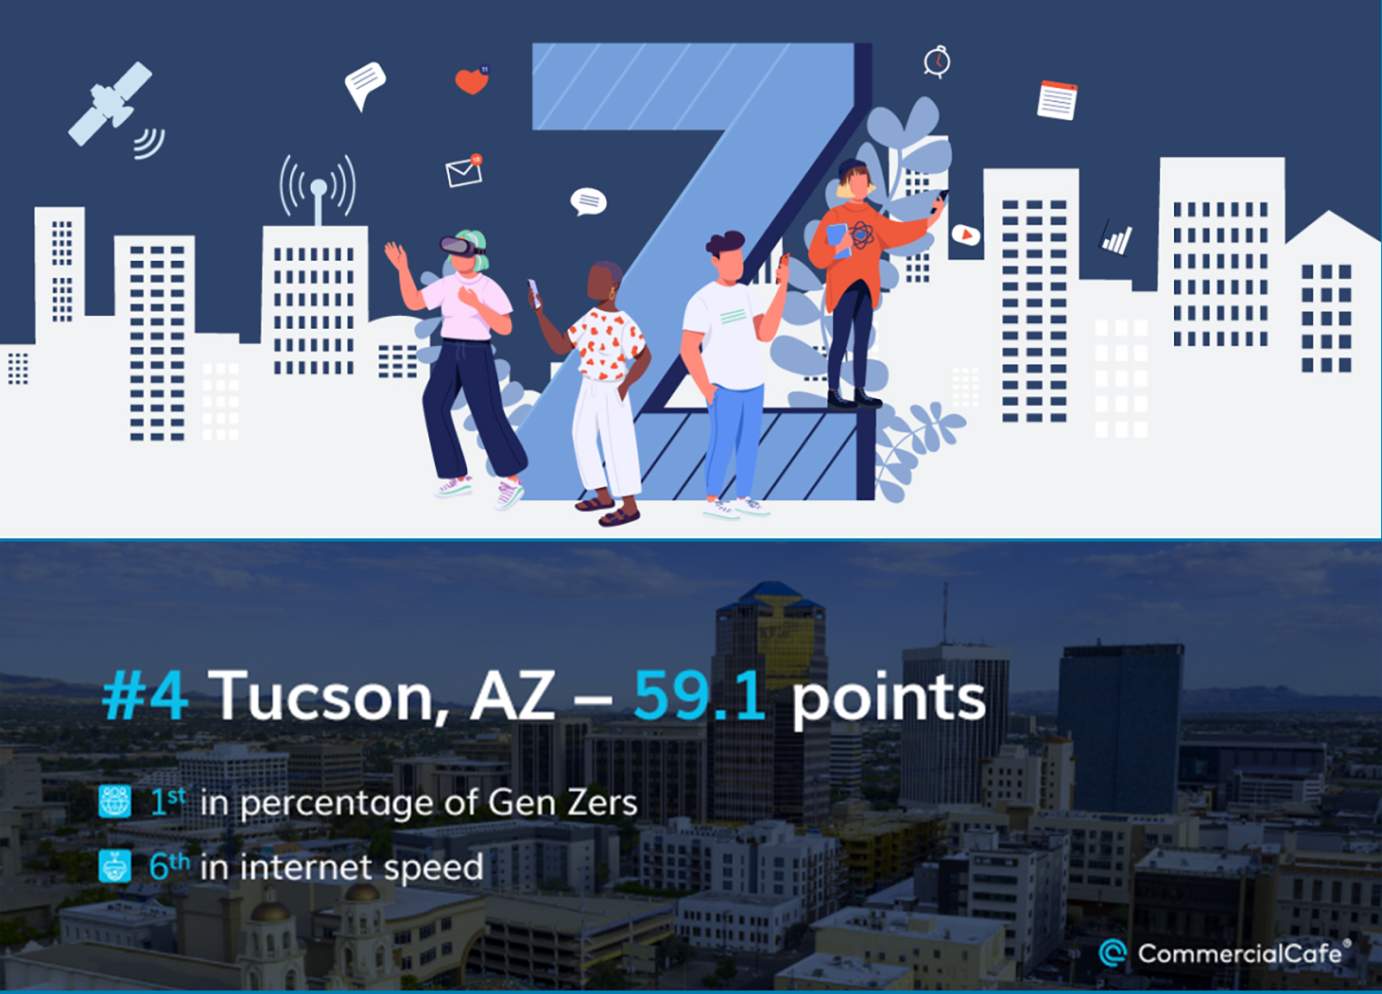 [Commercial Cafe rated Tucson as the No. 4 place for Gen Zers in 2023.]